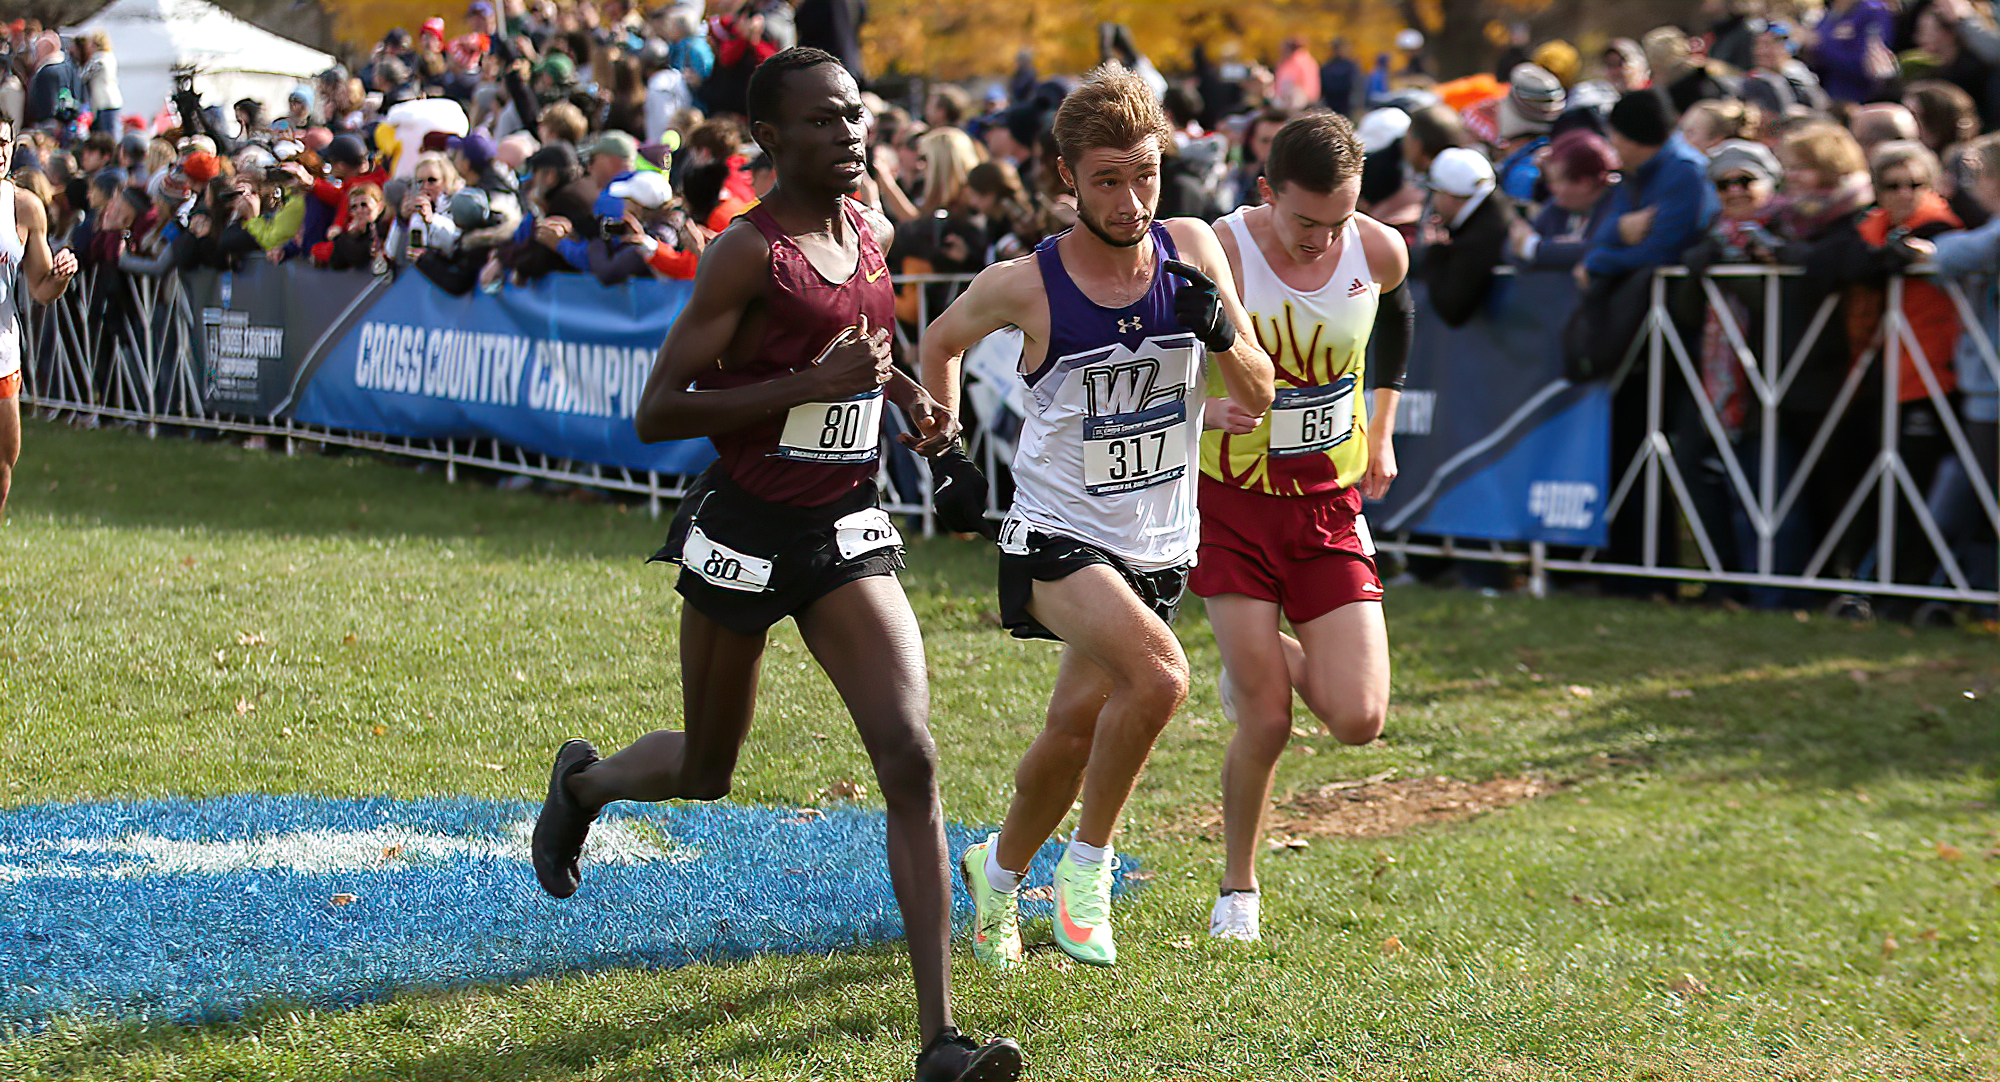 Senior Munir Isahak crosses the finish line at the NCAA Meet. He finished 21st and is only the third Cobber earn All-American honors.